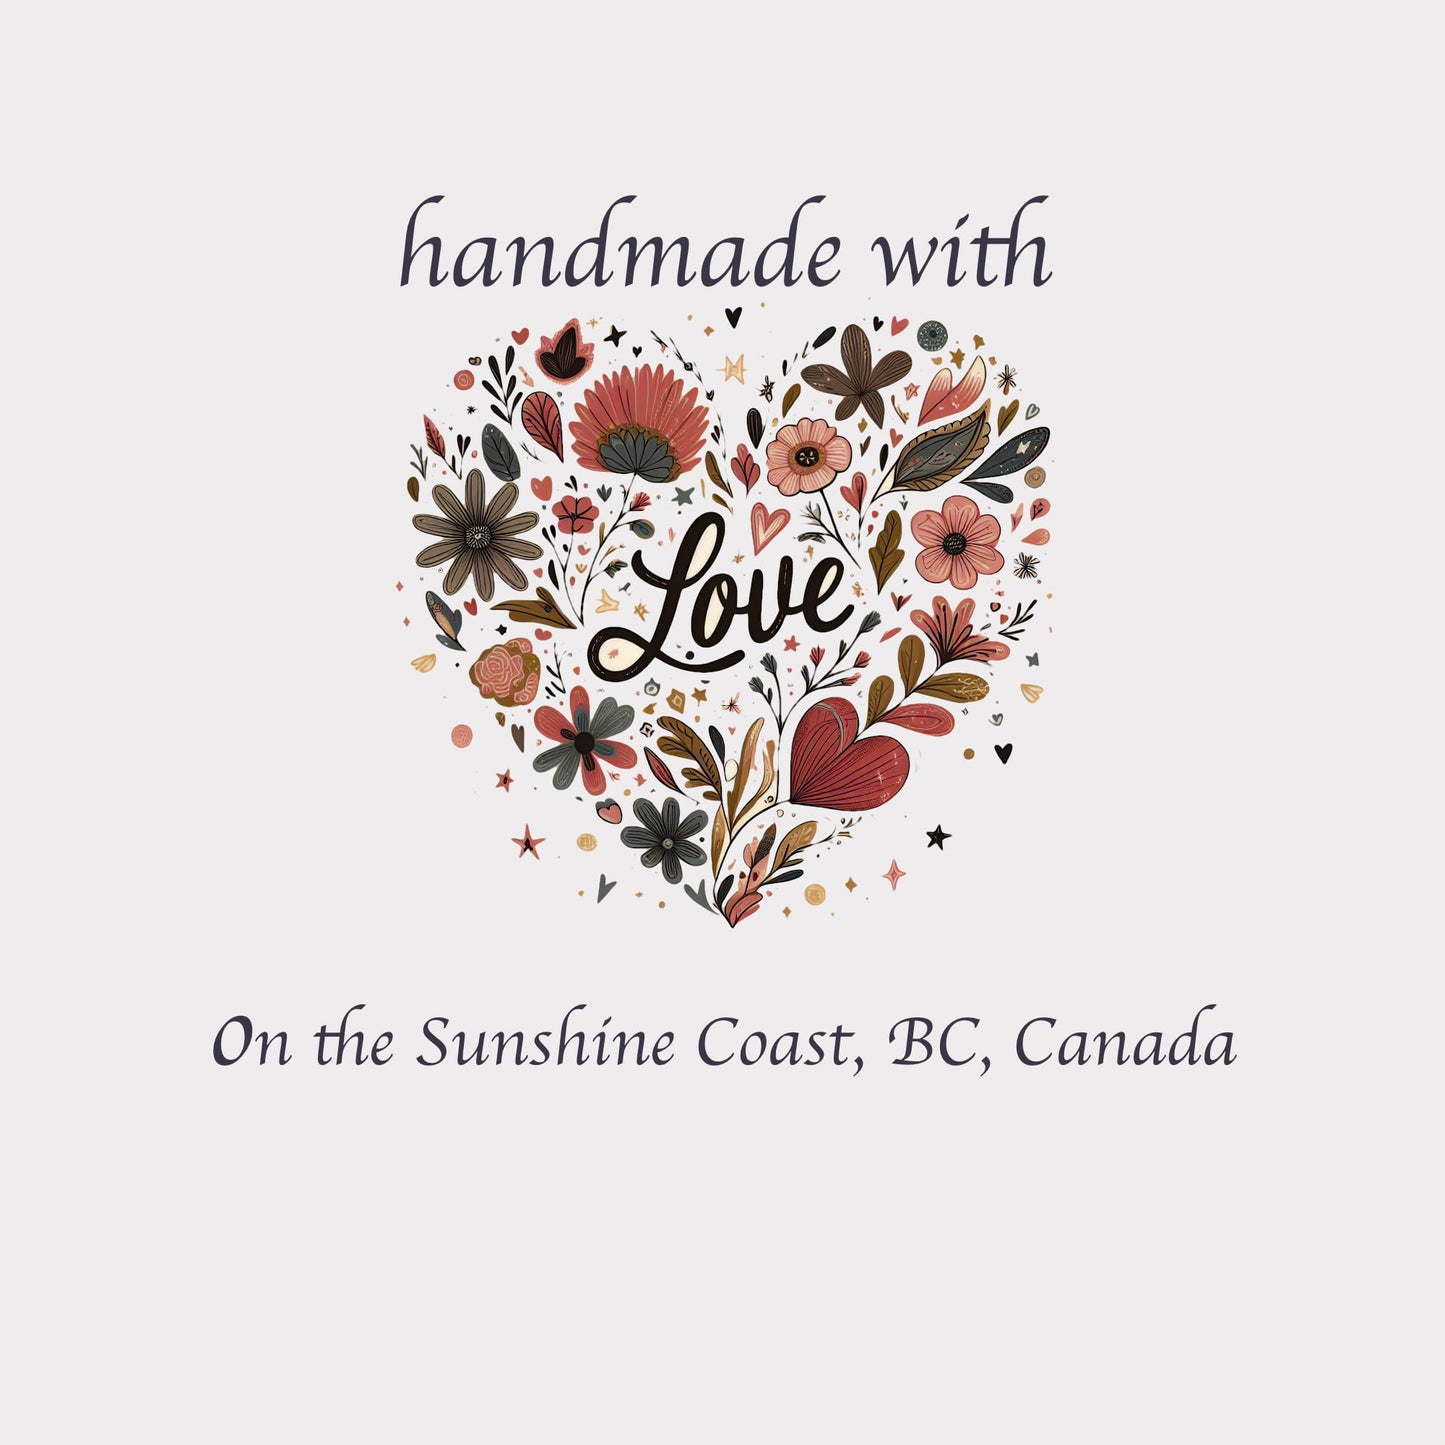 handmade with love by Coast Chimes graphic